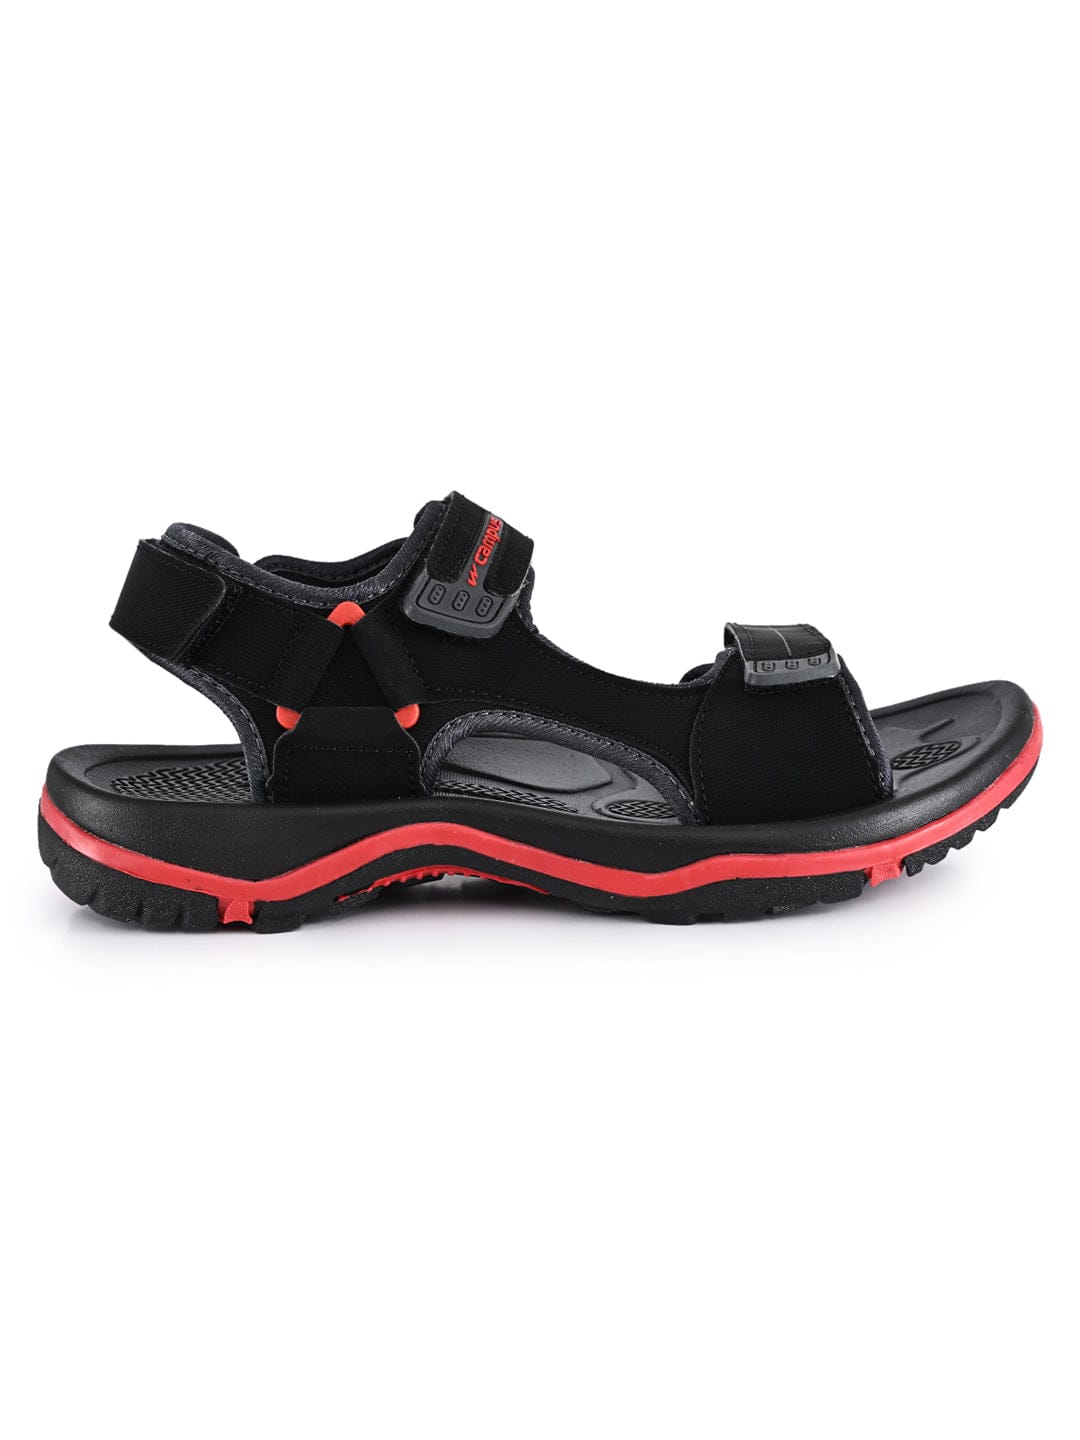 Buy Black & Red Sandals for Men by SPACE Online | Ajio.com